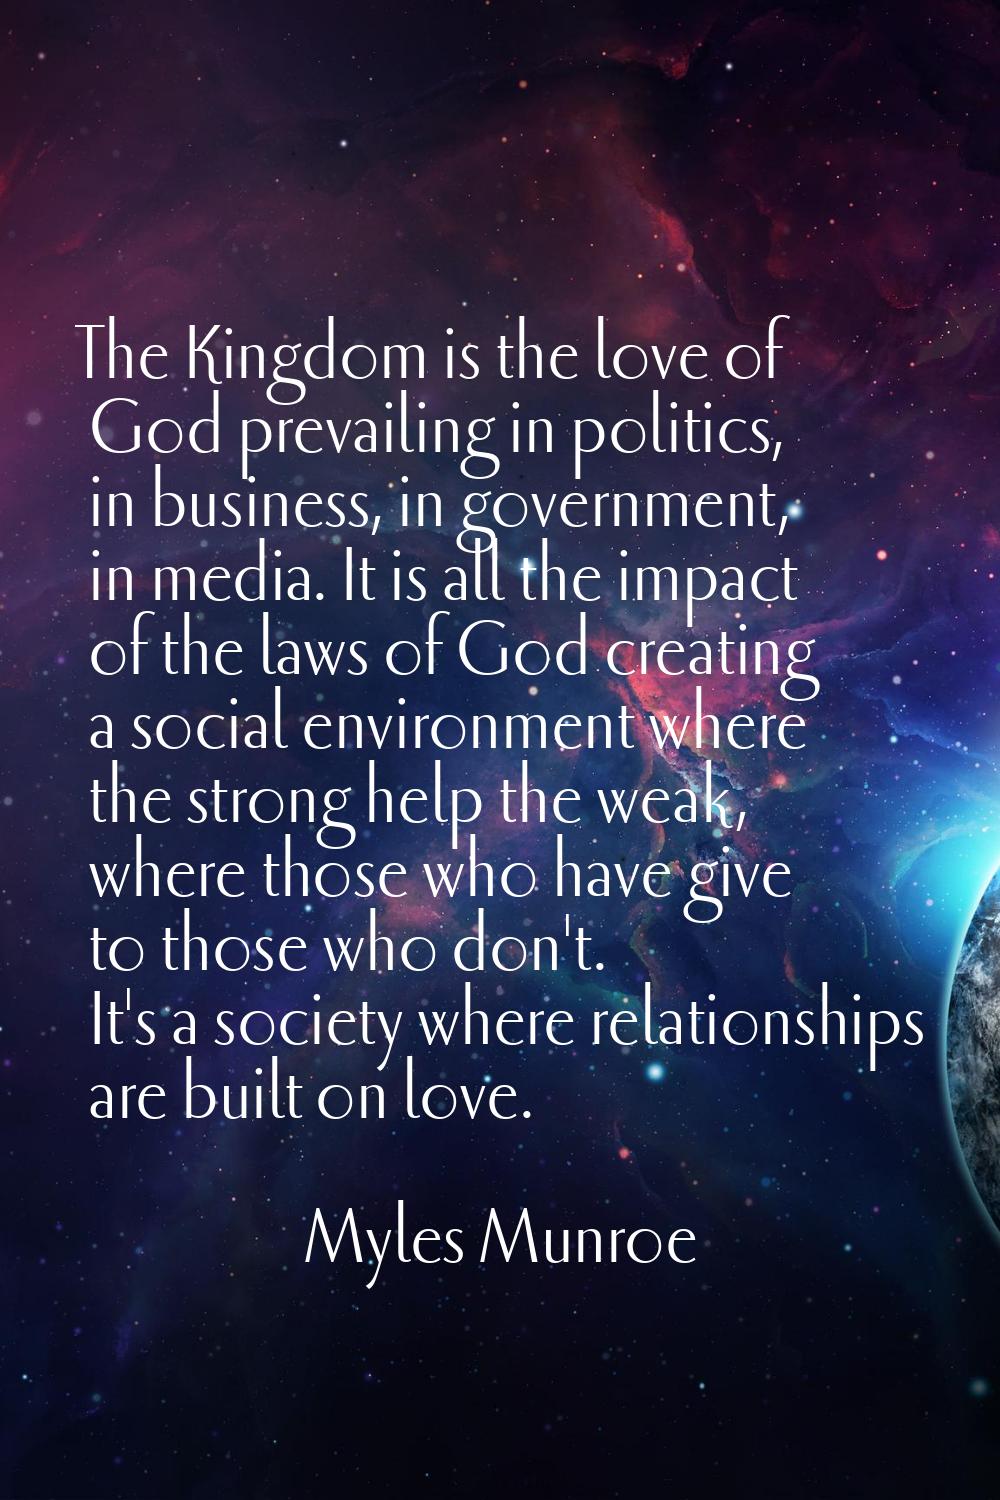 The Kingdom is the love of God prevailing in politics, in business, in government, in media. It is 